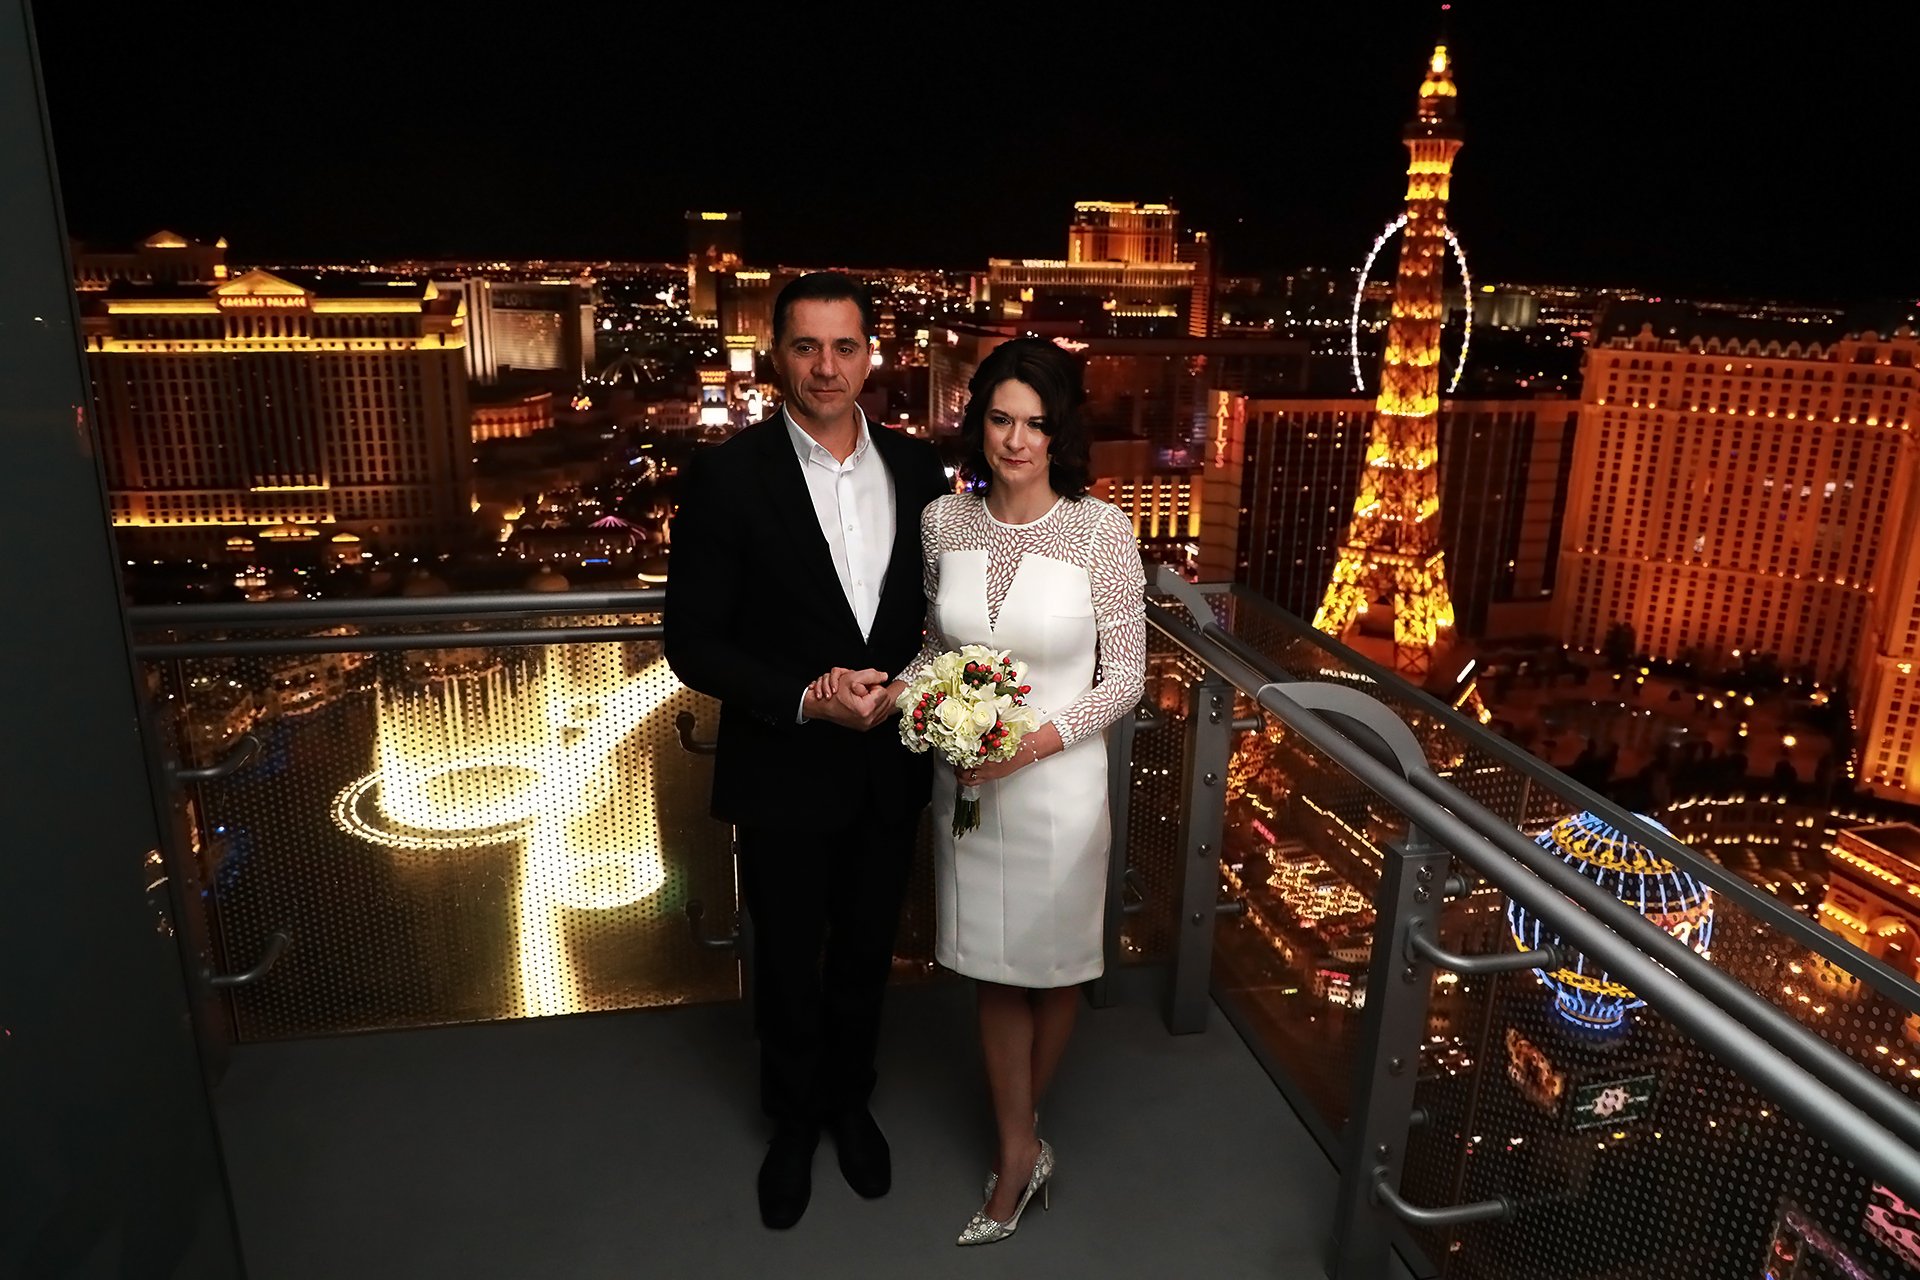 A bride and groom standing on a balcony overlooking the las vegas strip.